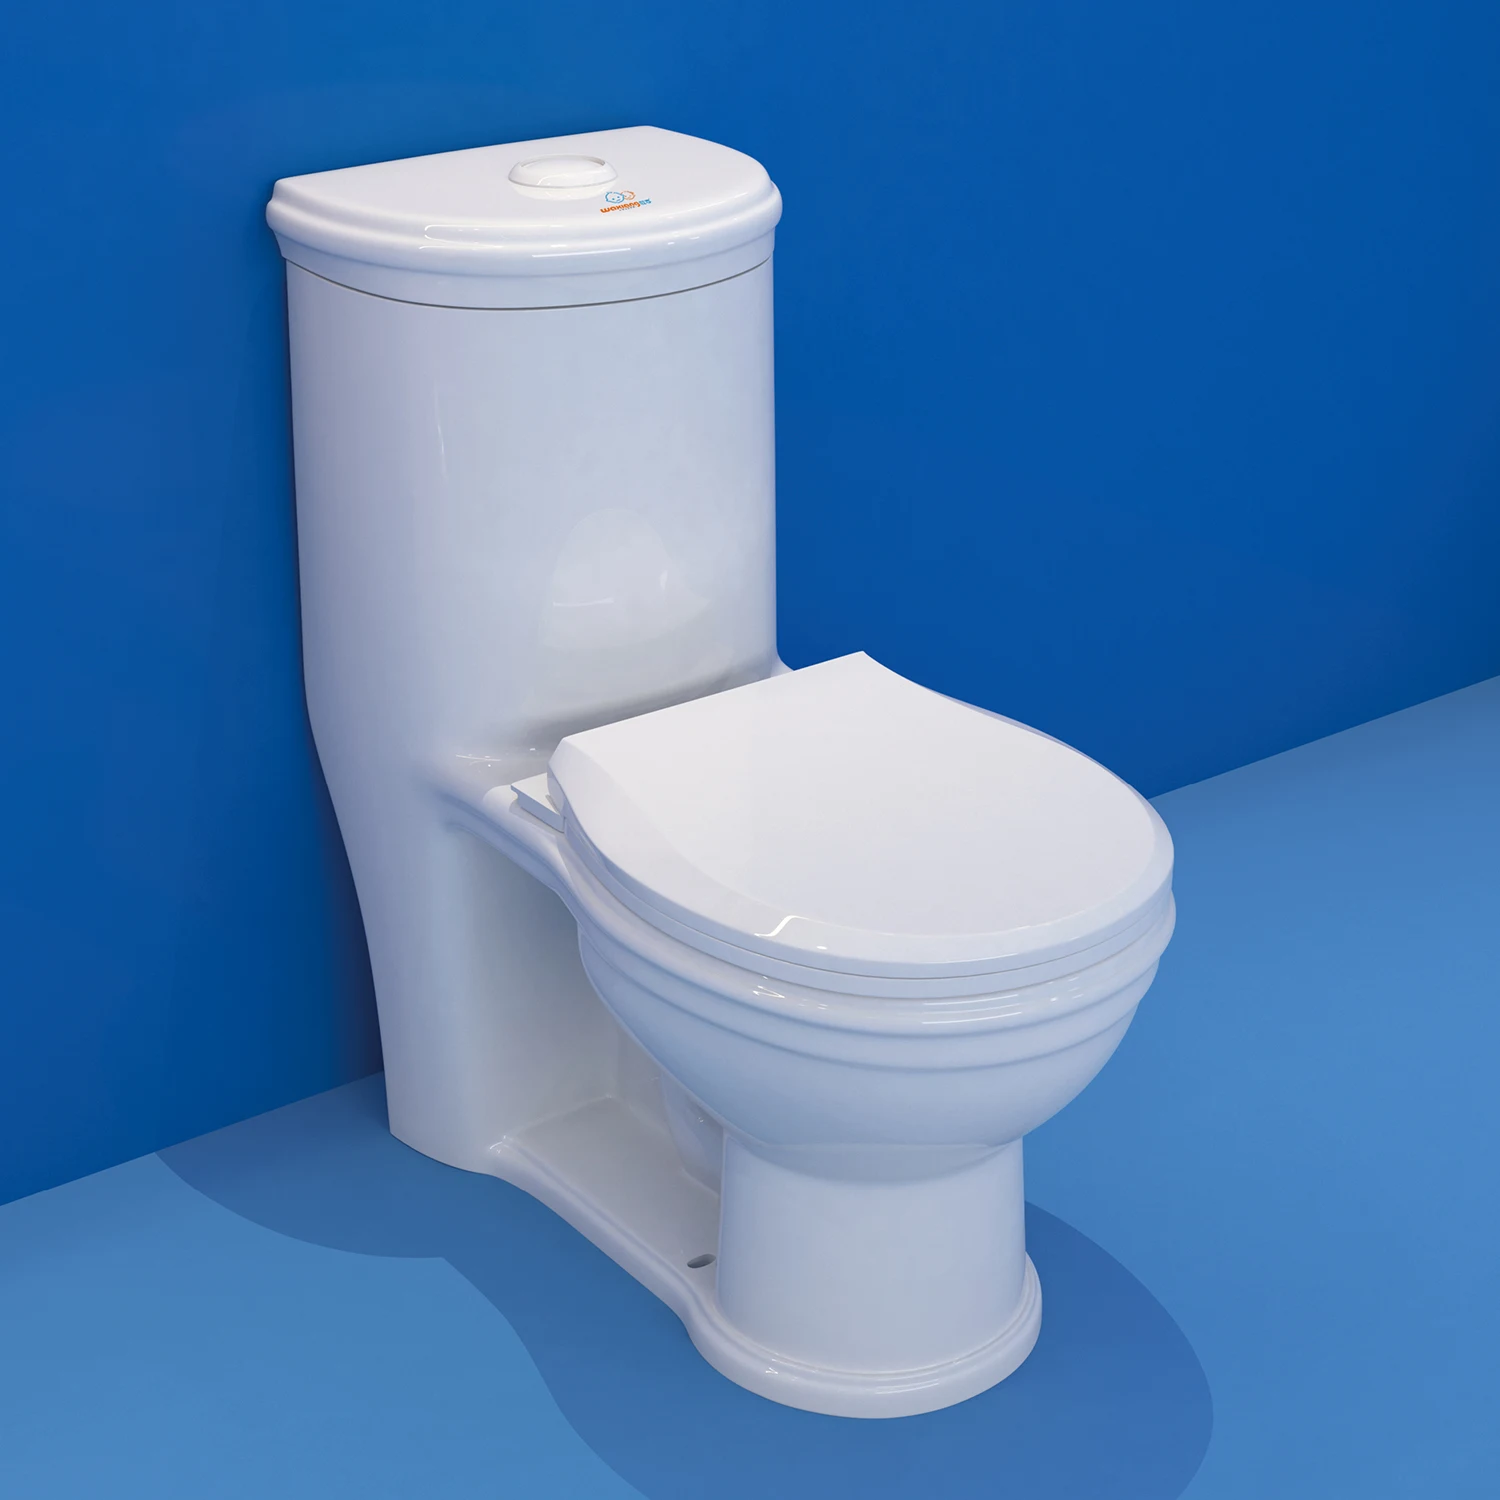 best junior toilet manufacturer in china -- waxiang ceramics